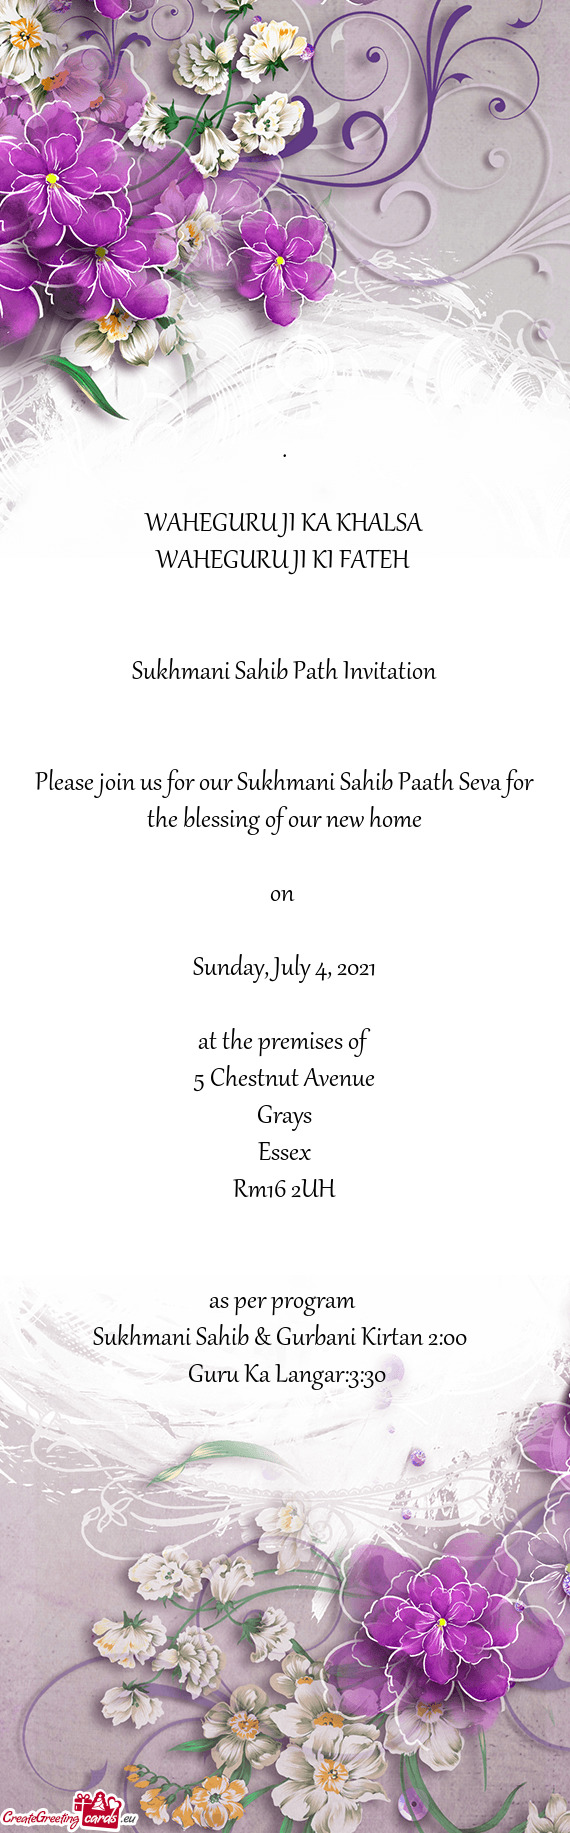 Please join us for our Sukhmani Sahib Paath Seva for the blessing of our new home